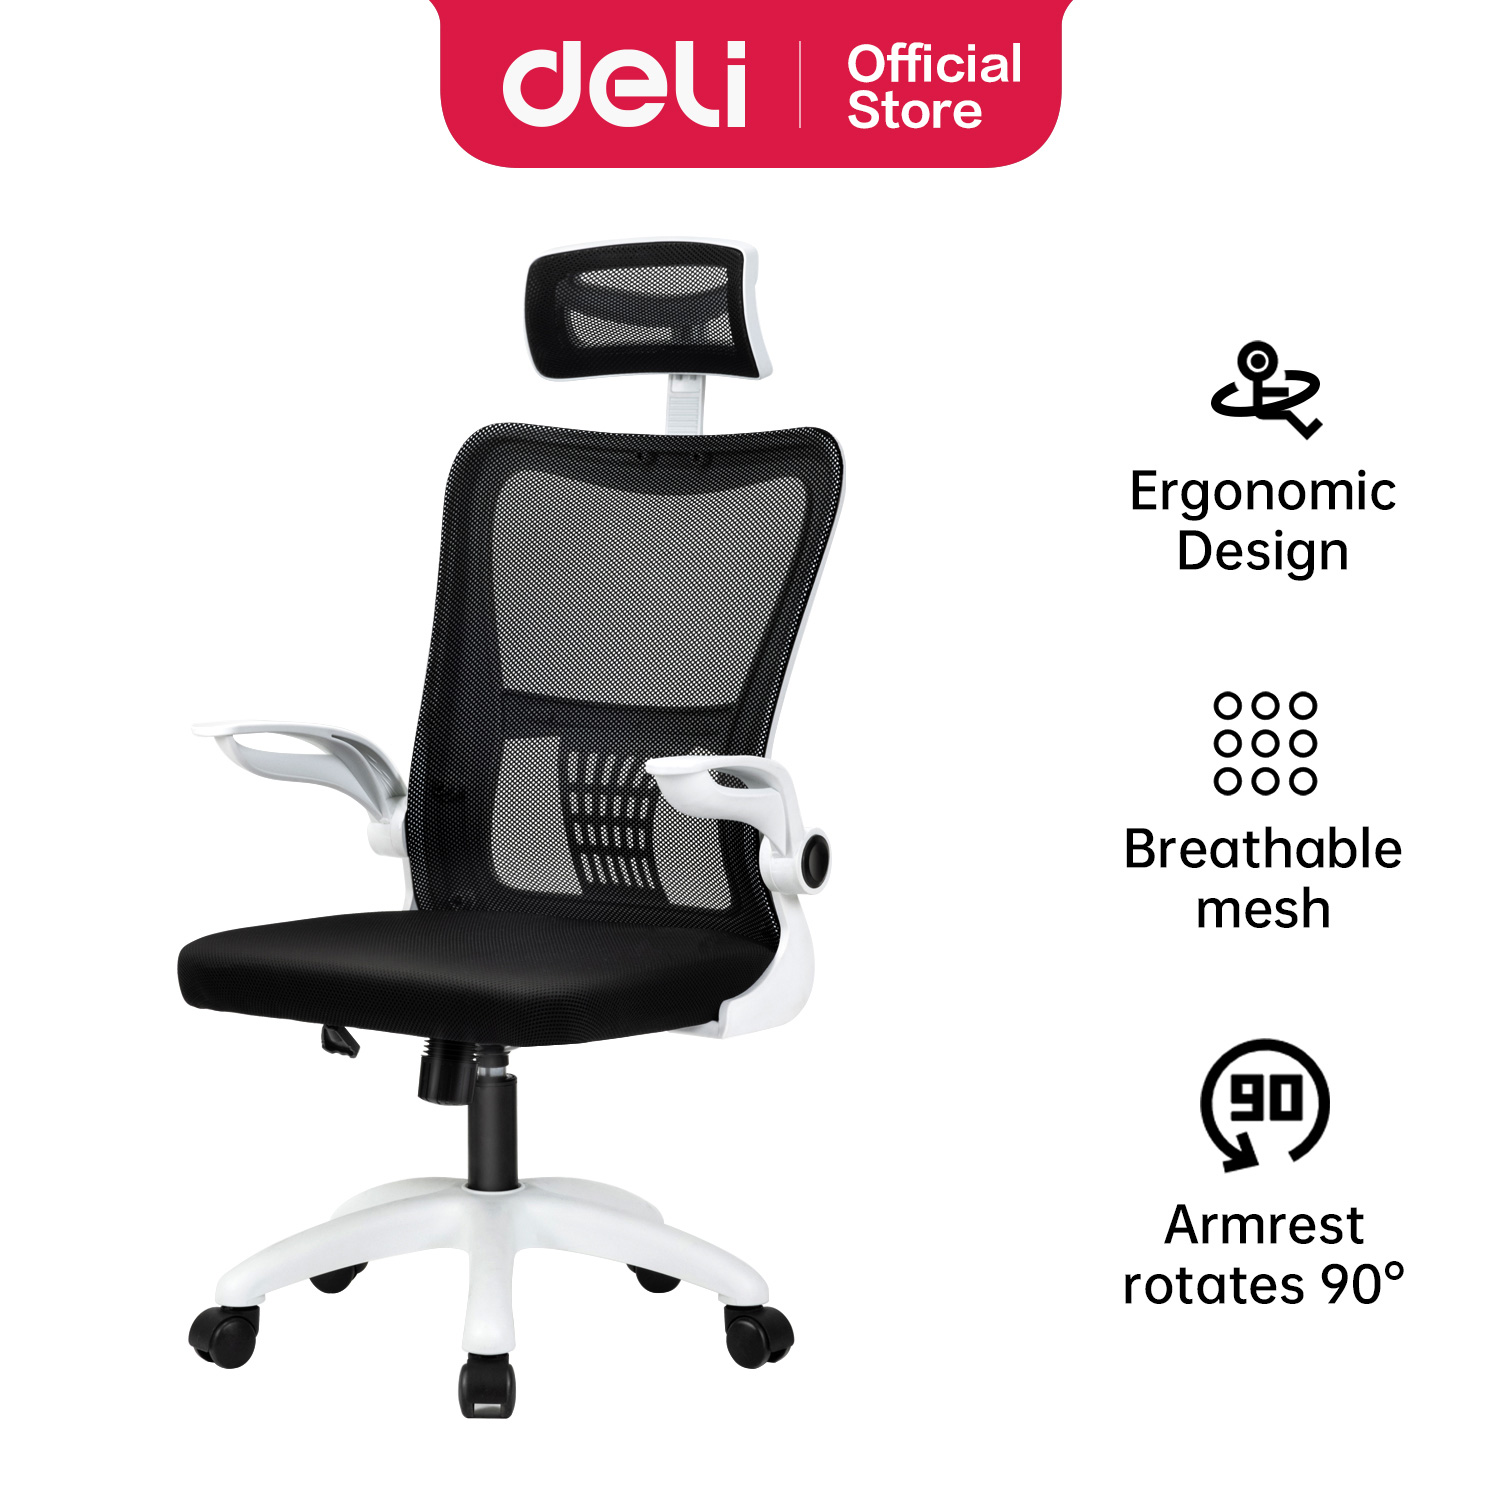 Deli-E4926 Office Chair with headrest